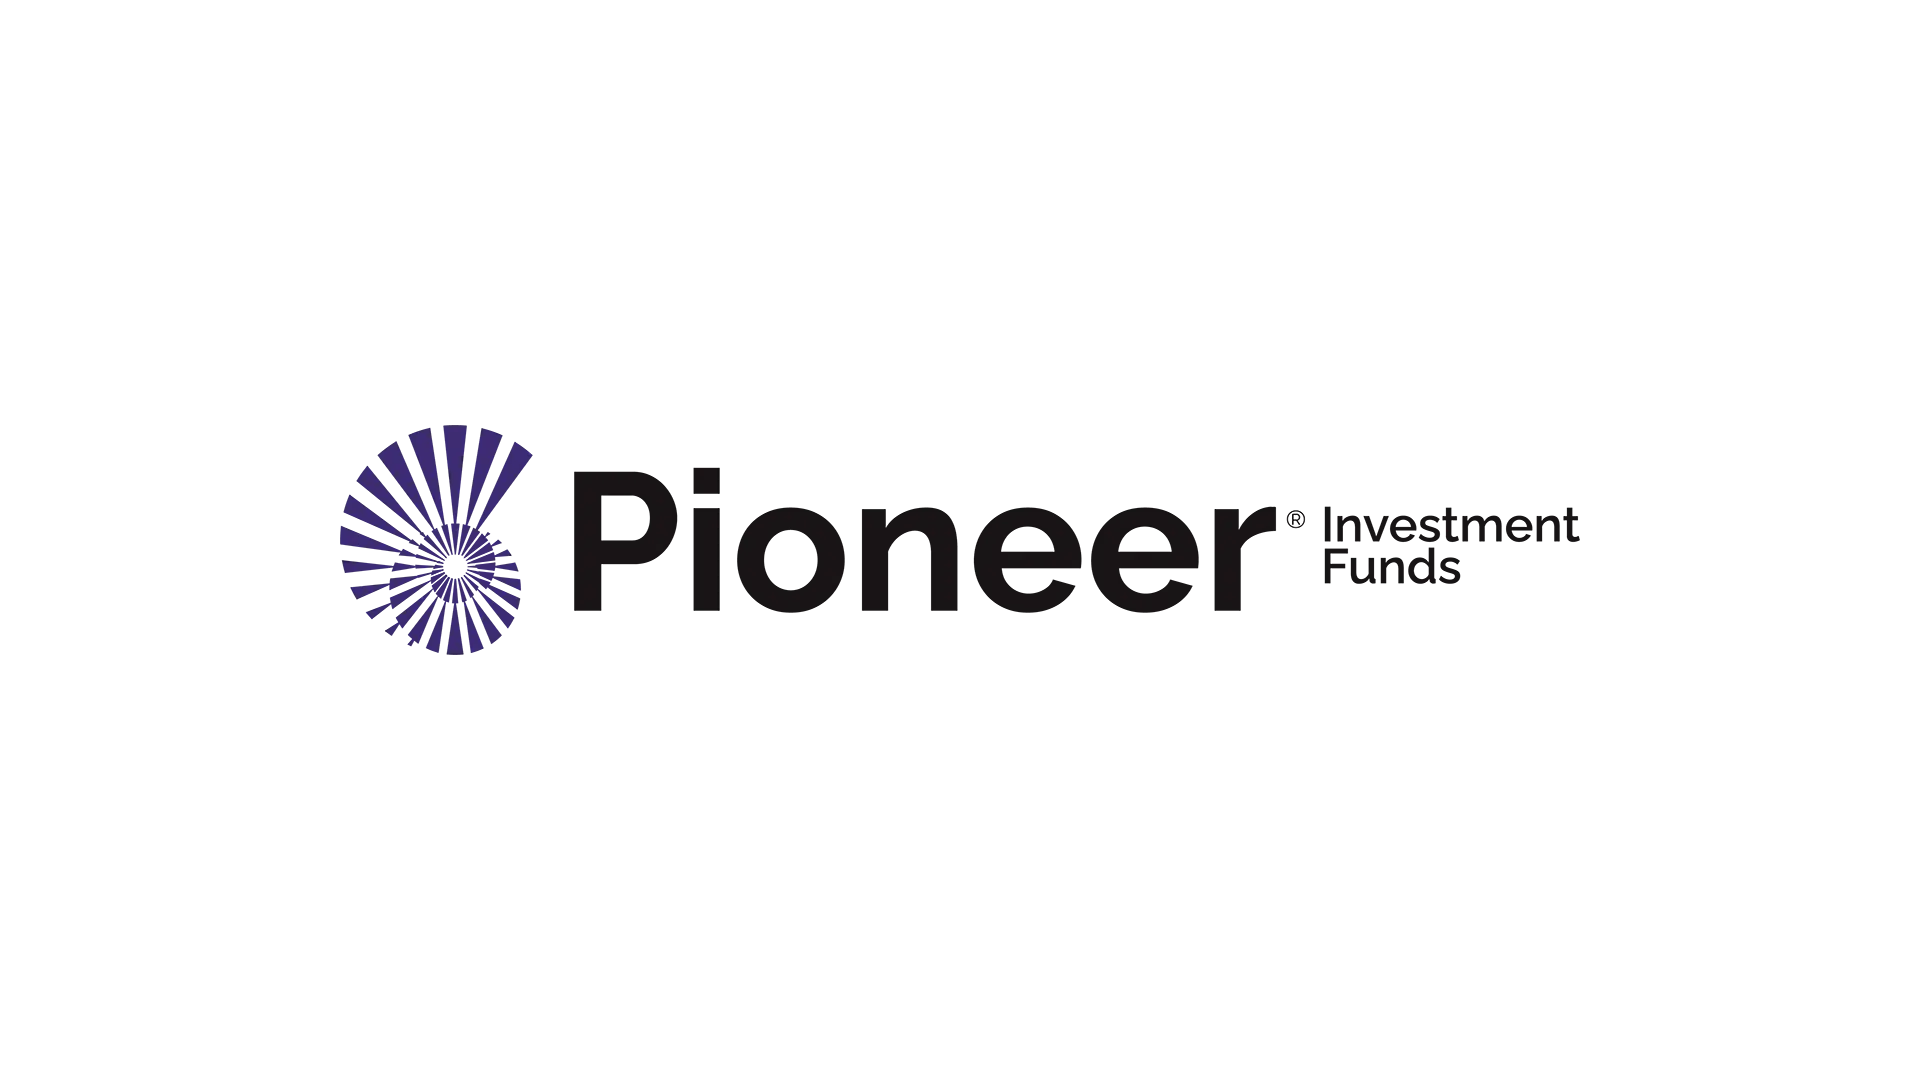 Pioneer adds free trade zone industrial park to its investment portfolio